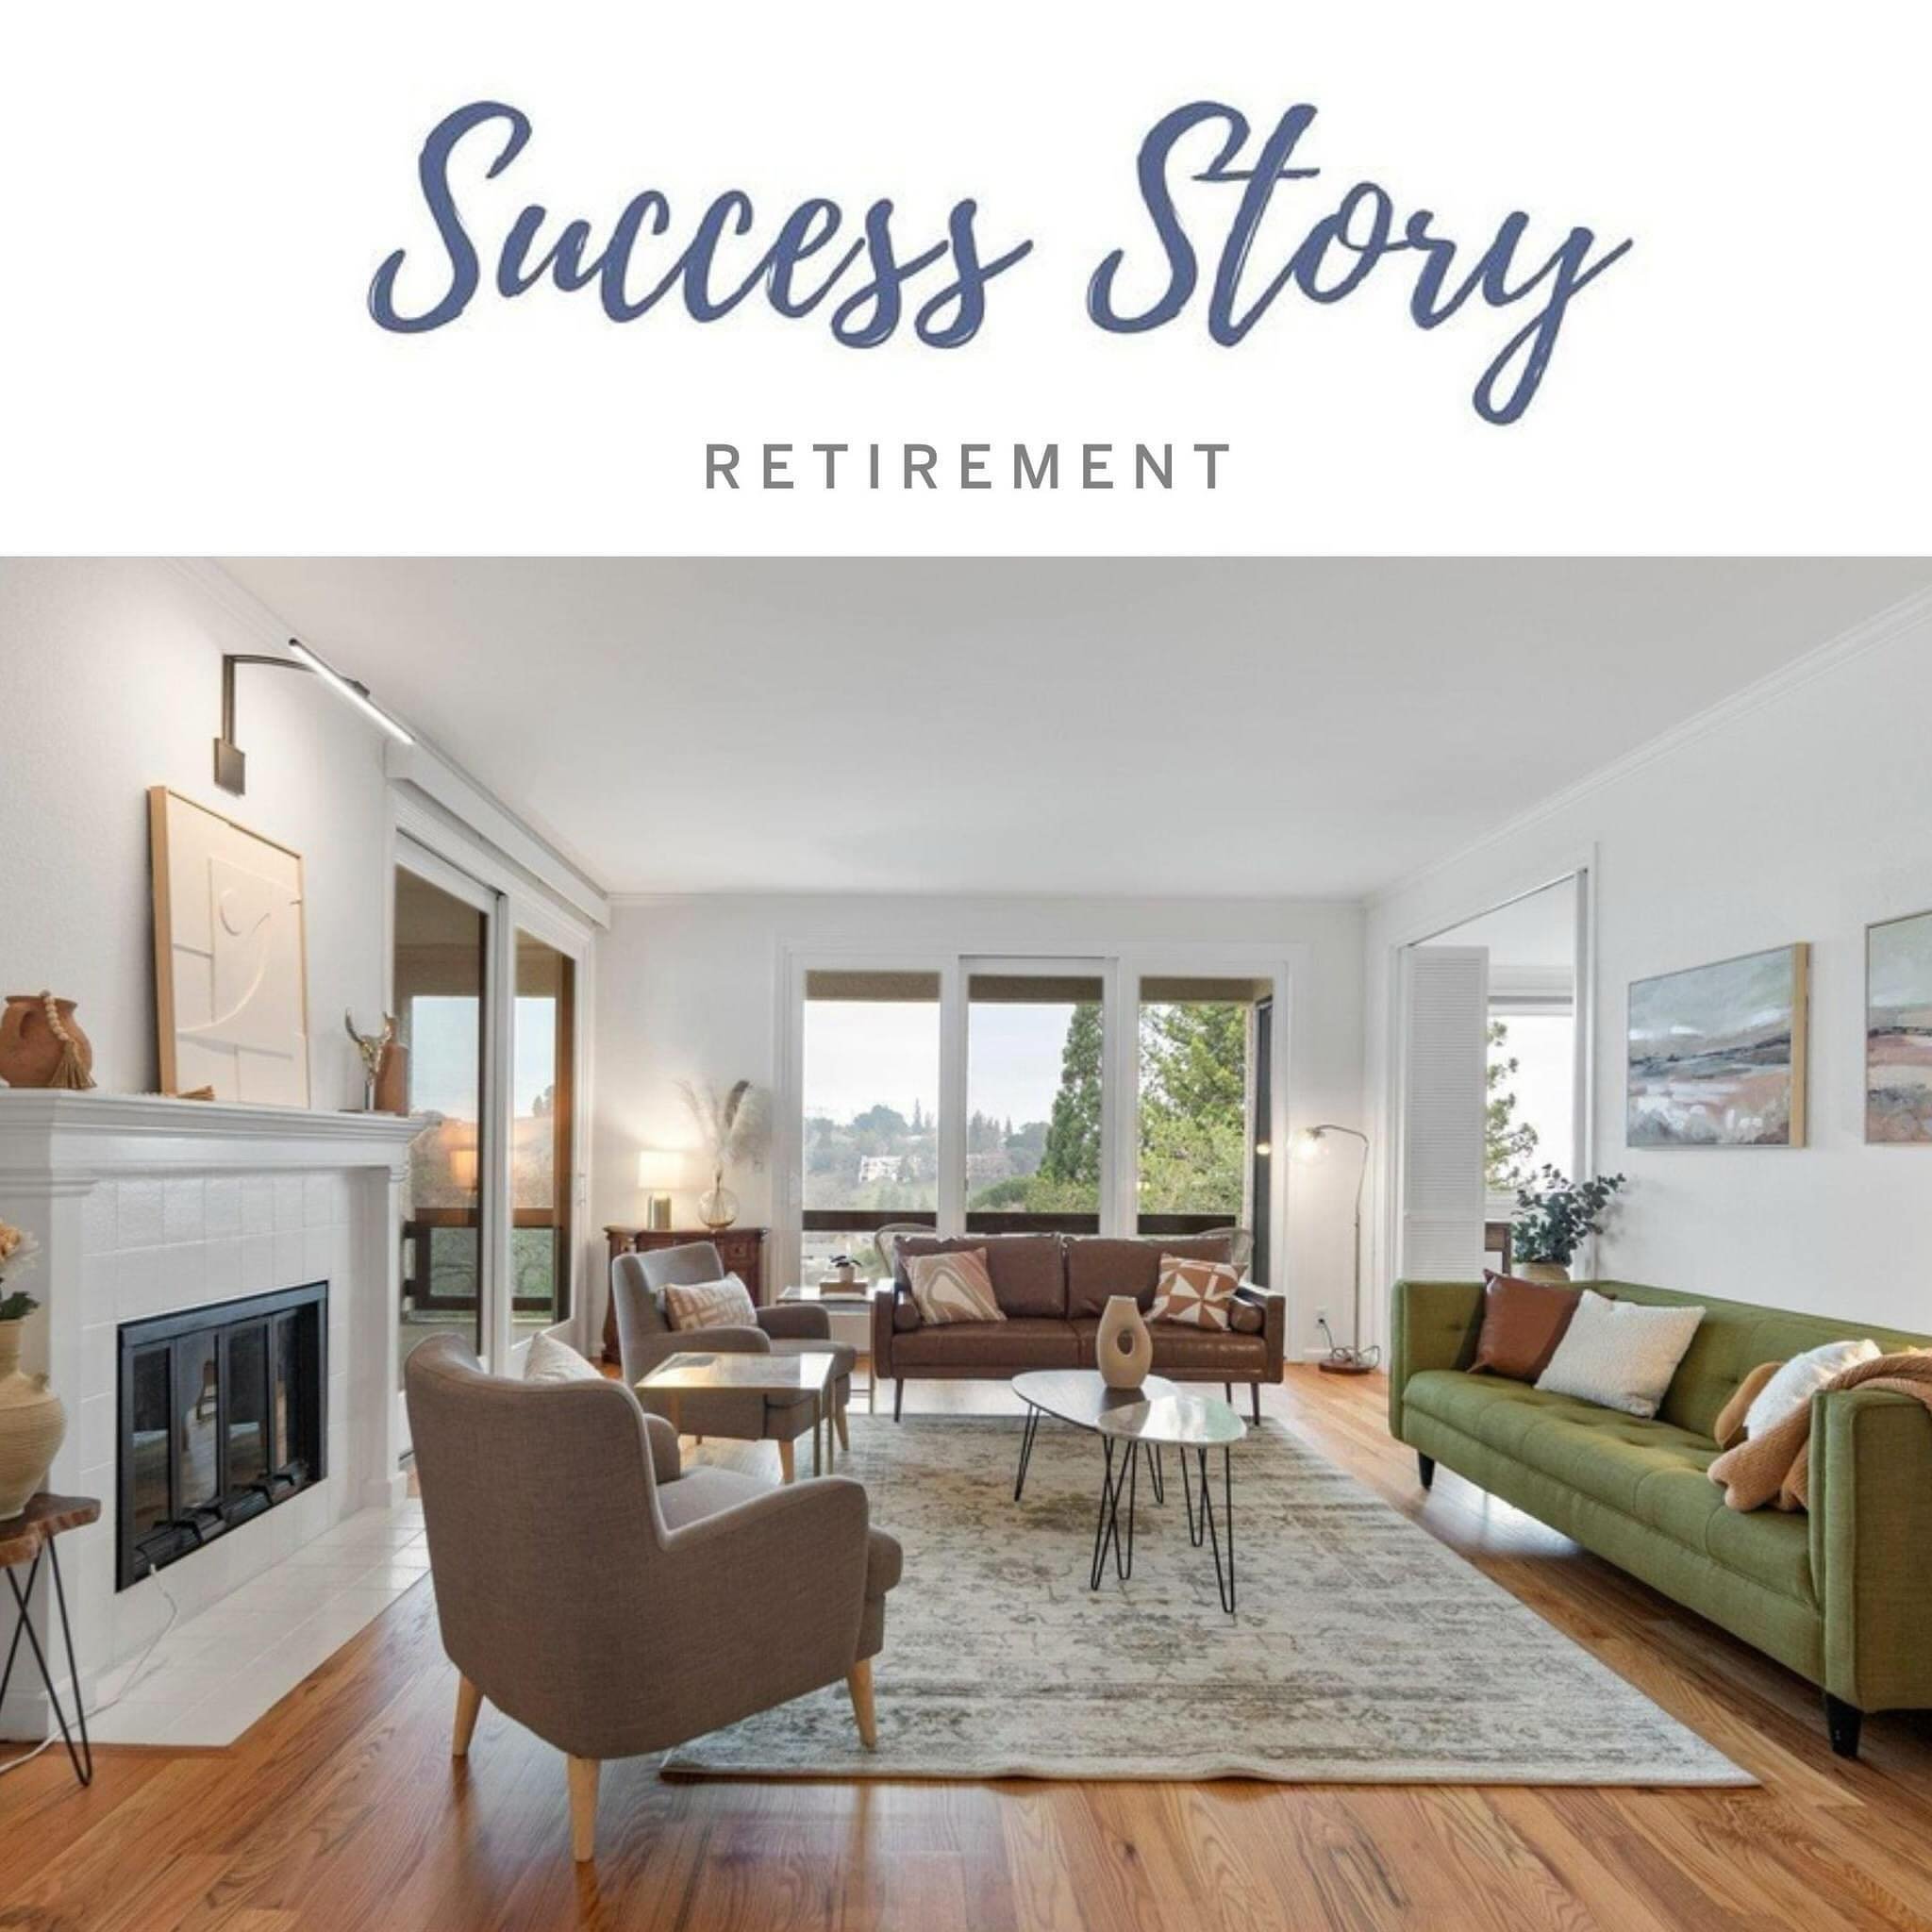 Our clients, relocating from Washington State to a serene retirement community in Walnut Creek, embarked on a journey filled with excitement and anticipation. However, the transition wasn&rsquo;t without its challenges. As they navigated the complexi